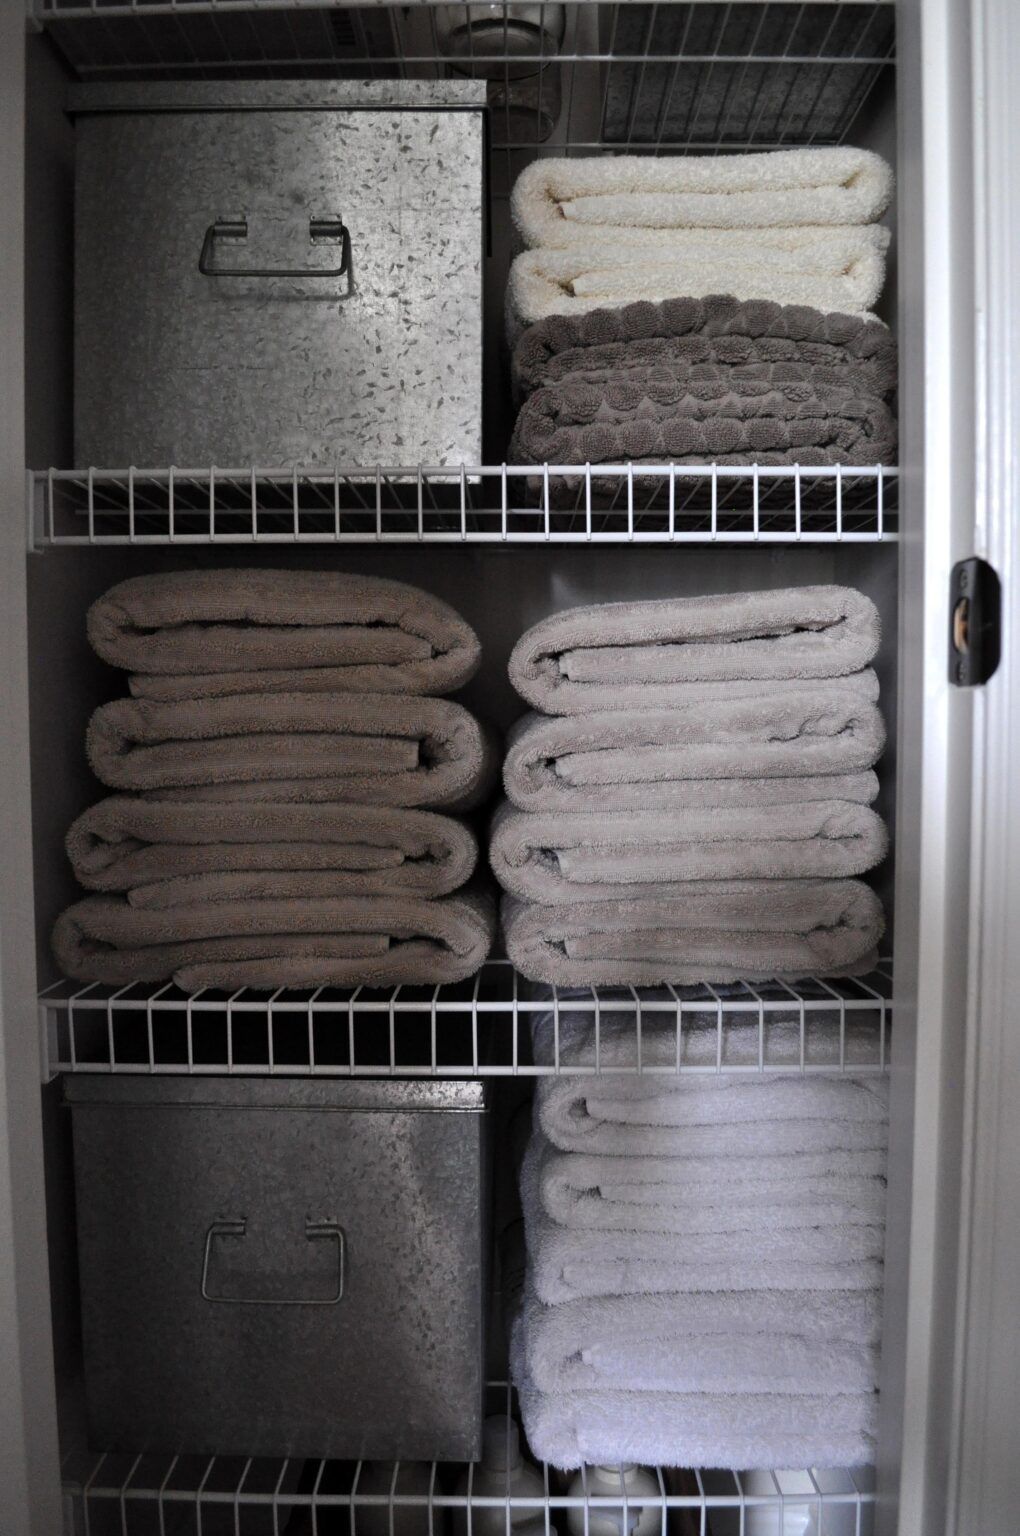 Linen closet / bathroom closet organization for a family. Stackable bins  and a rack on the door help maximize storage and keep everyone's…